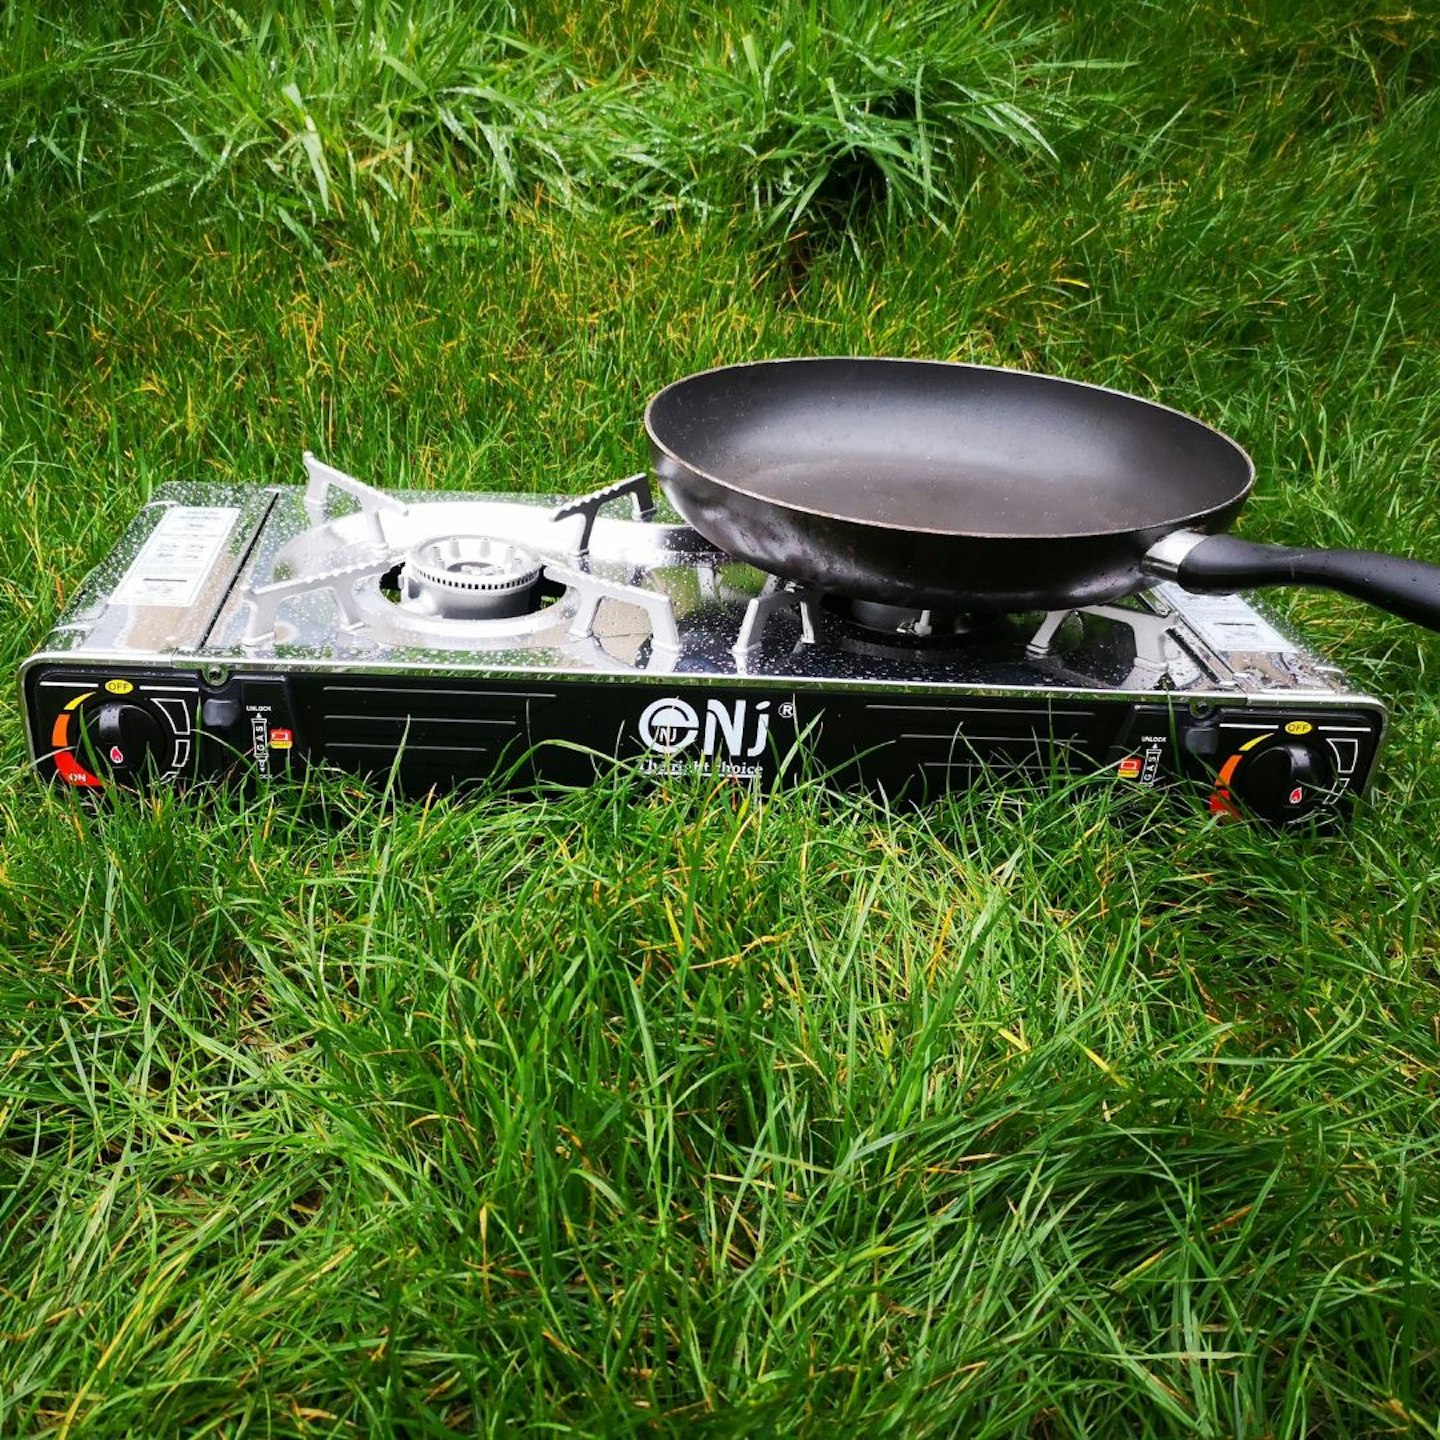 NK stove in long grass with pan